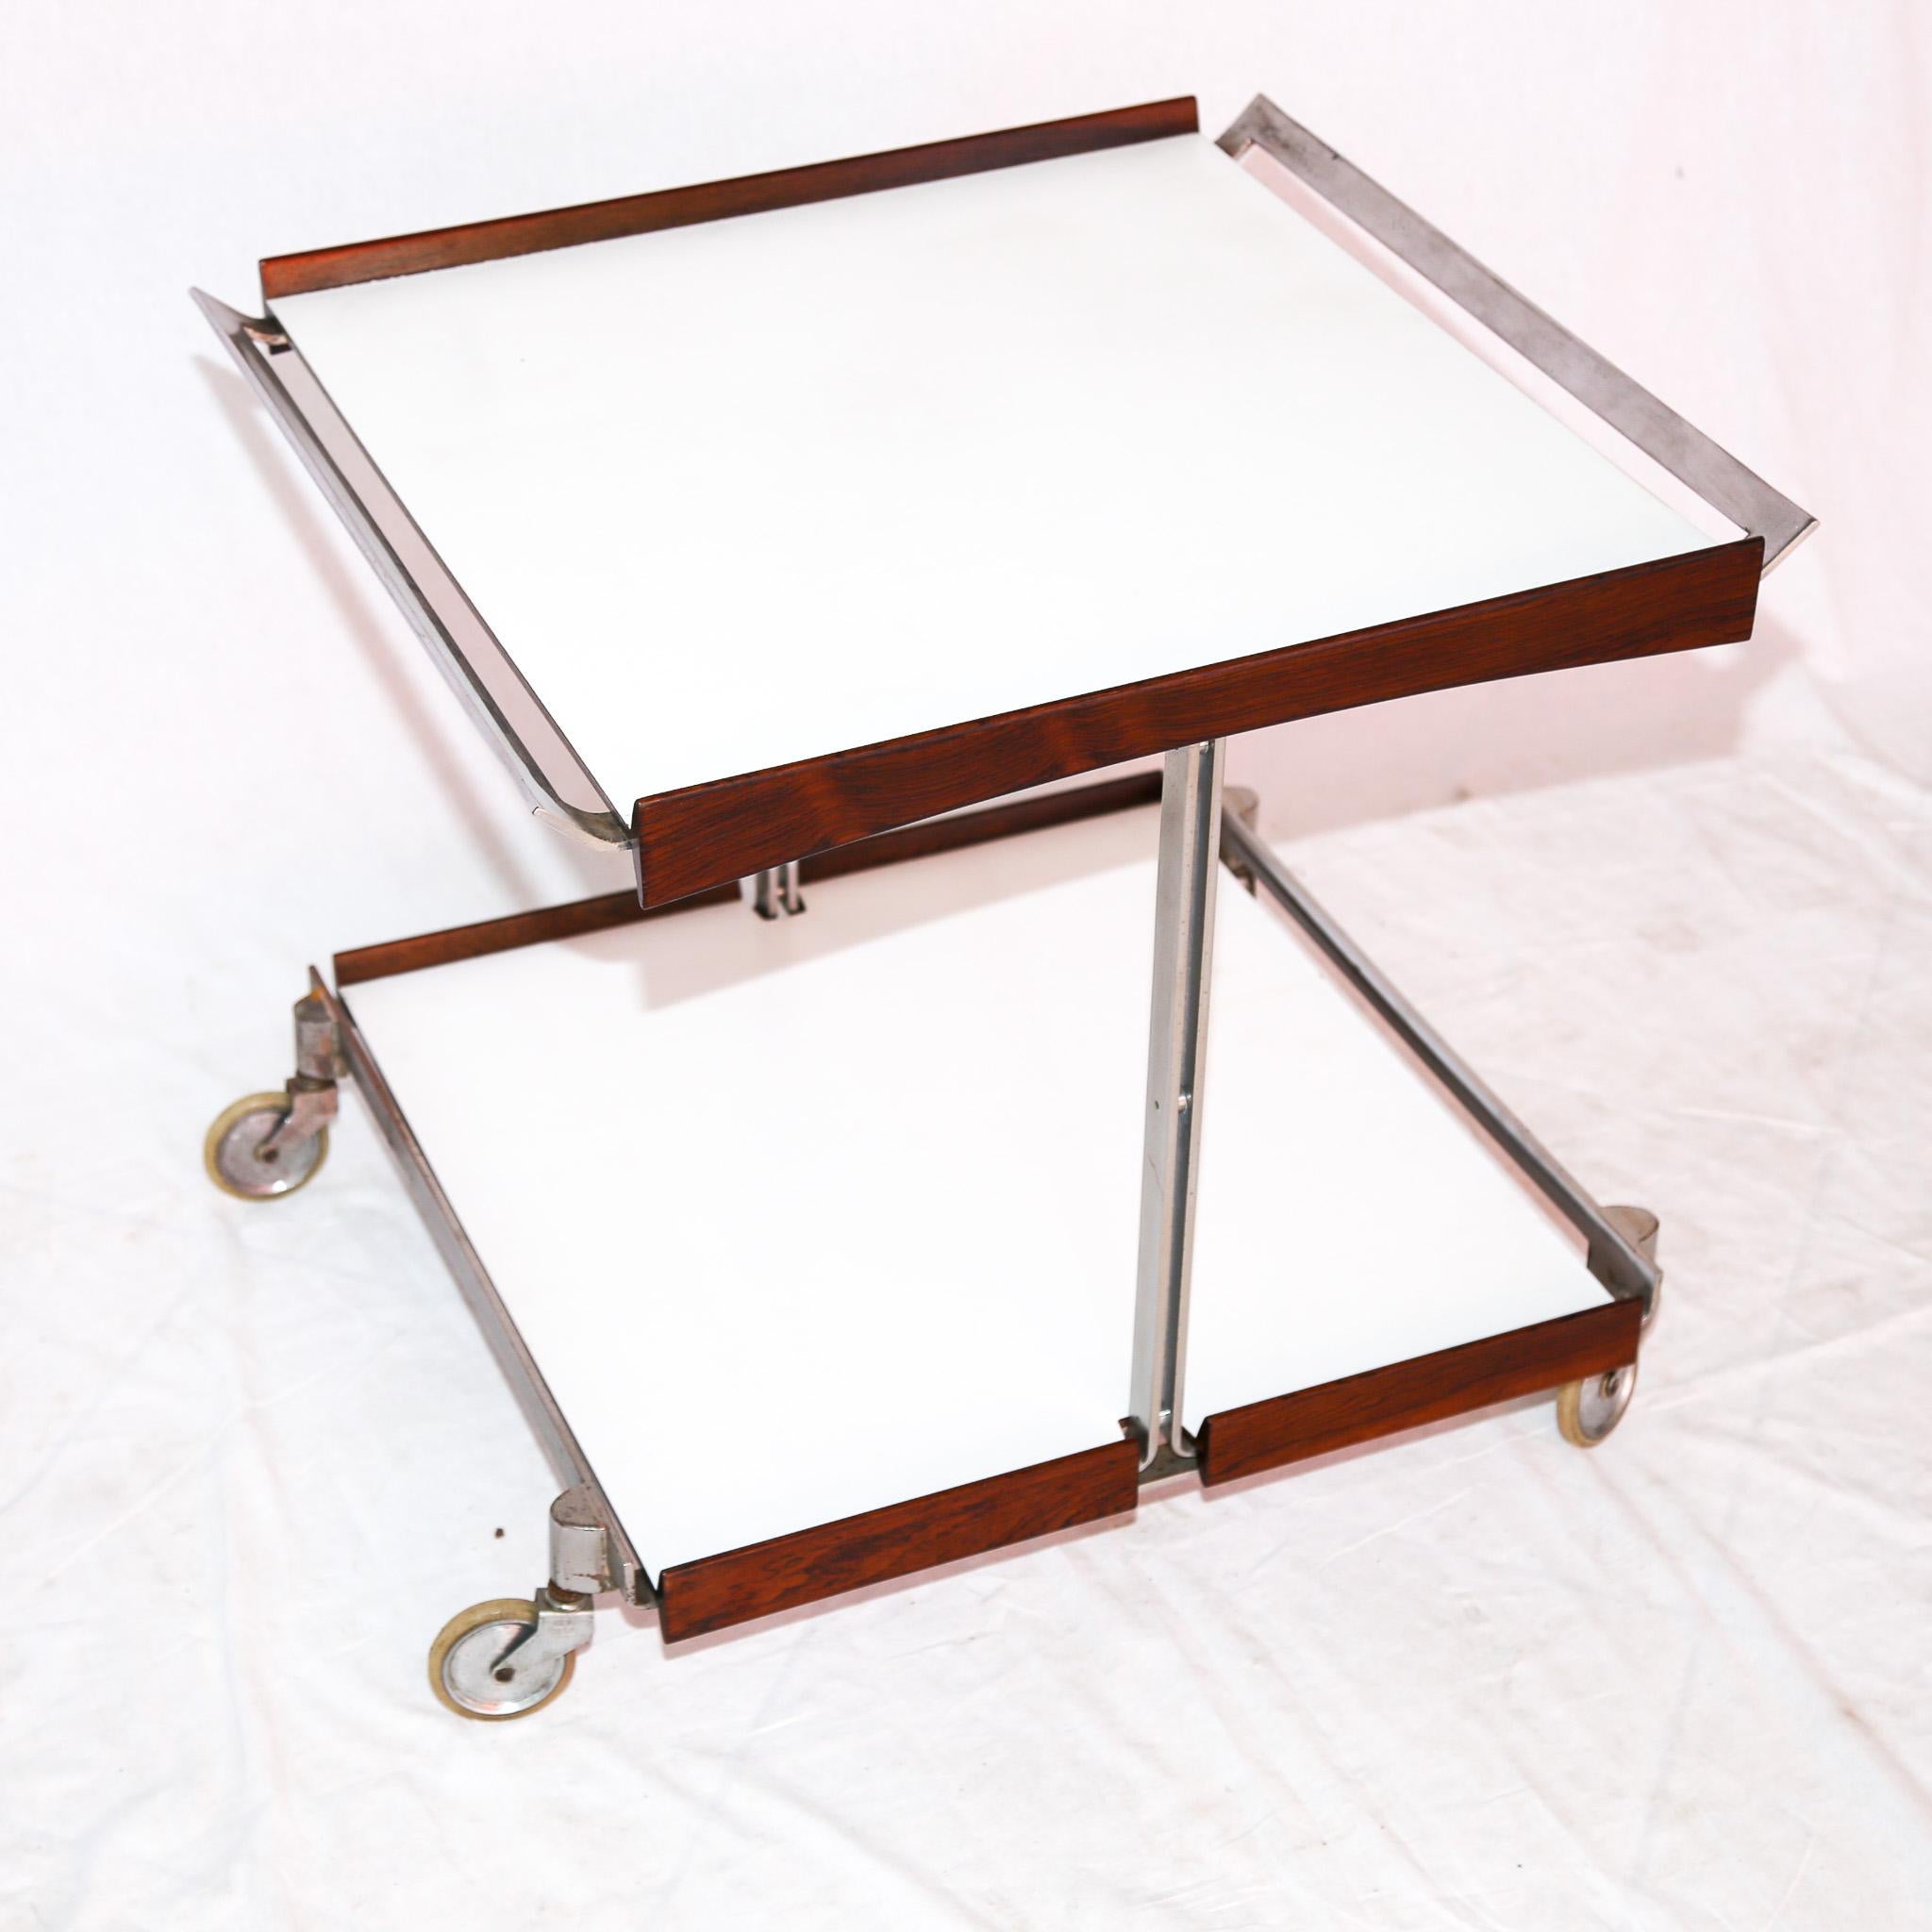 Brazilian Modern Bar Cart in Hardwood, Chrome, and White Formica by Forma, 1960s For Sale 1